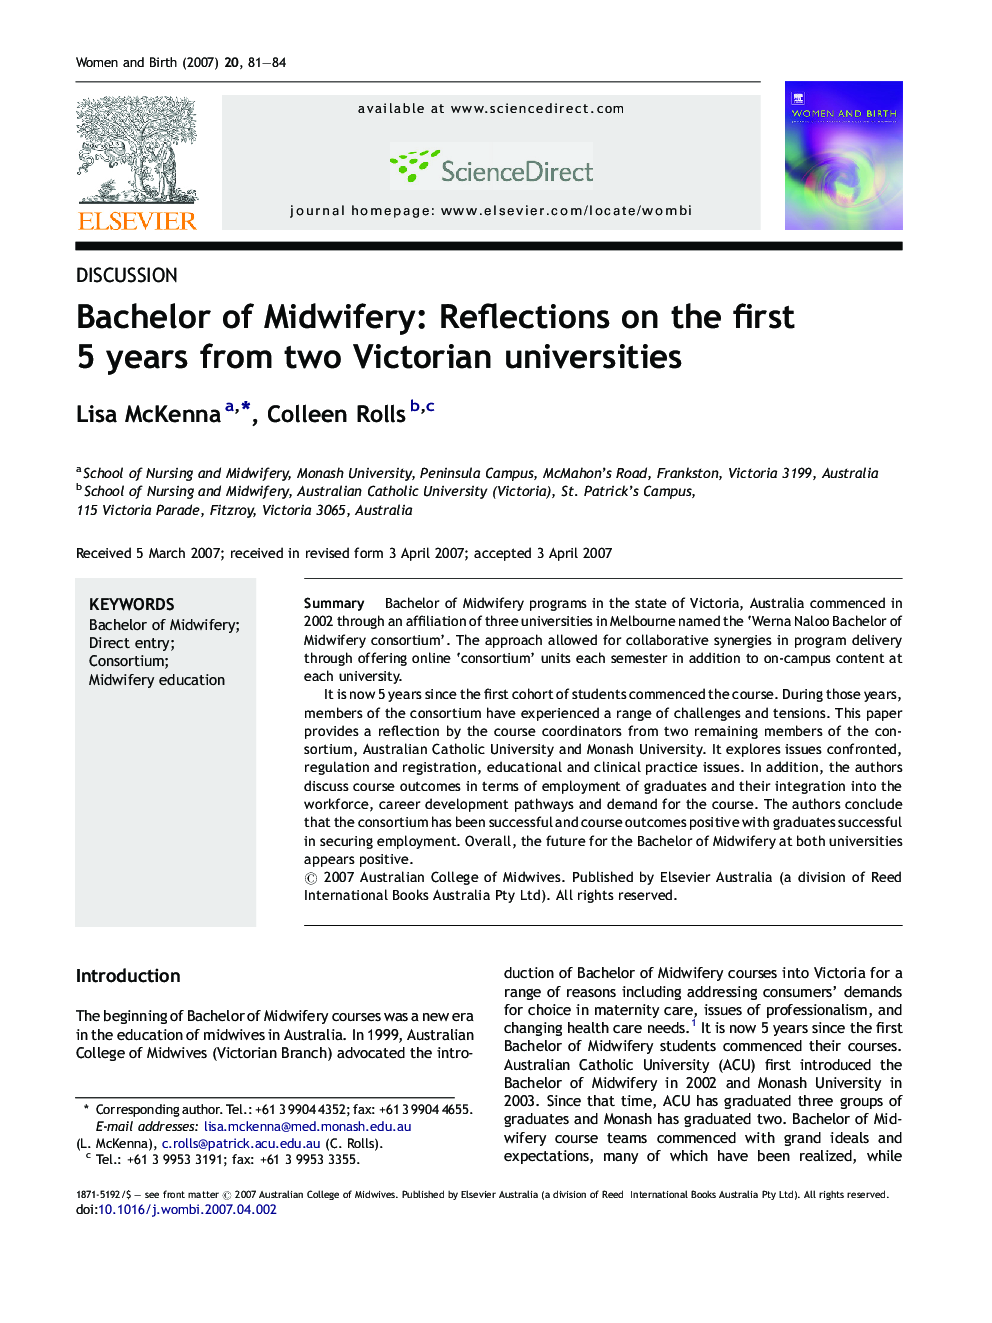 Bachelor of Midwifery: Reflections on the first 5 years from two Victorian universities